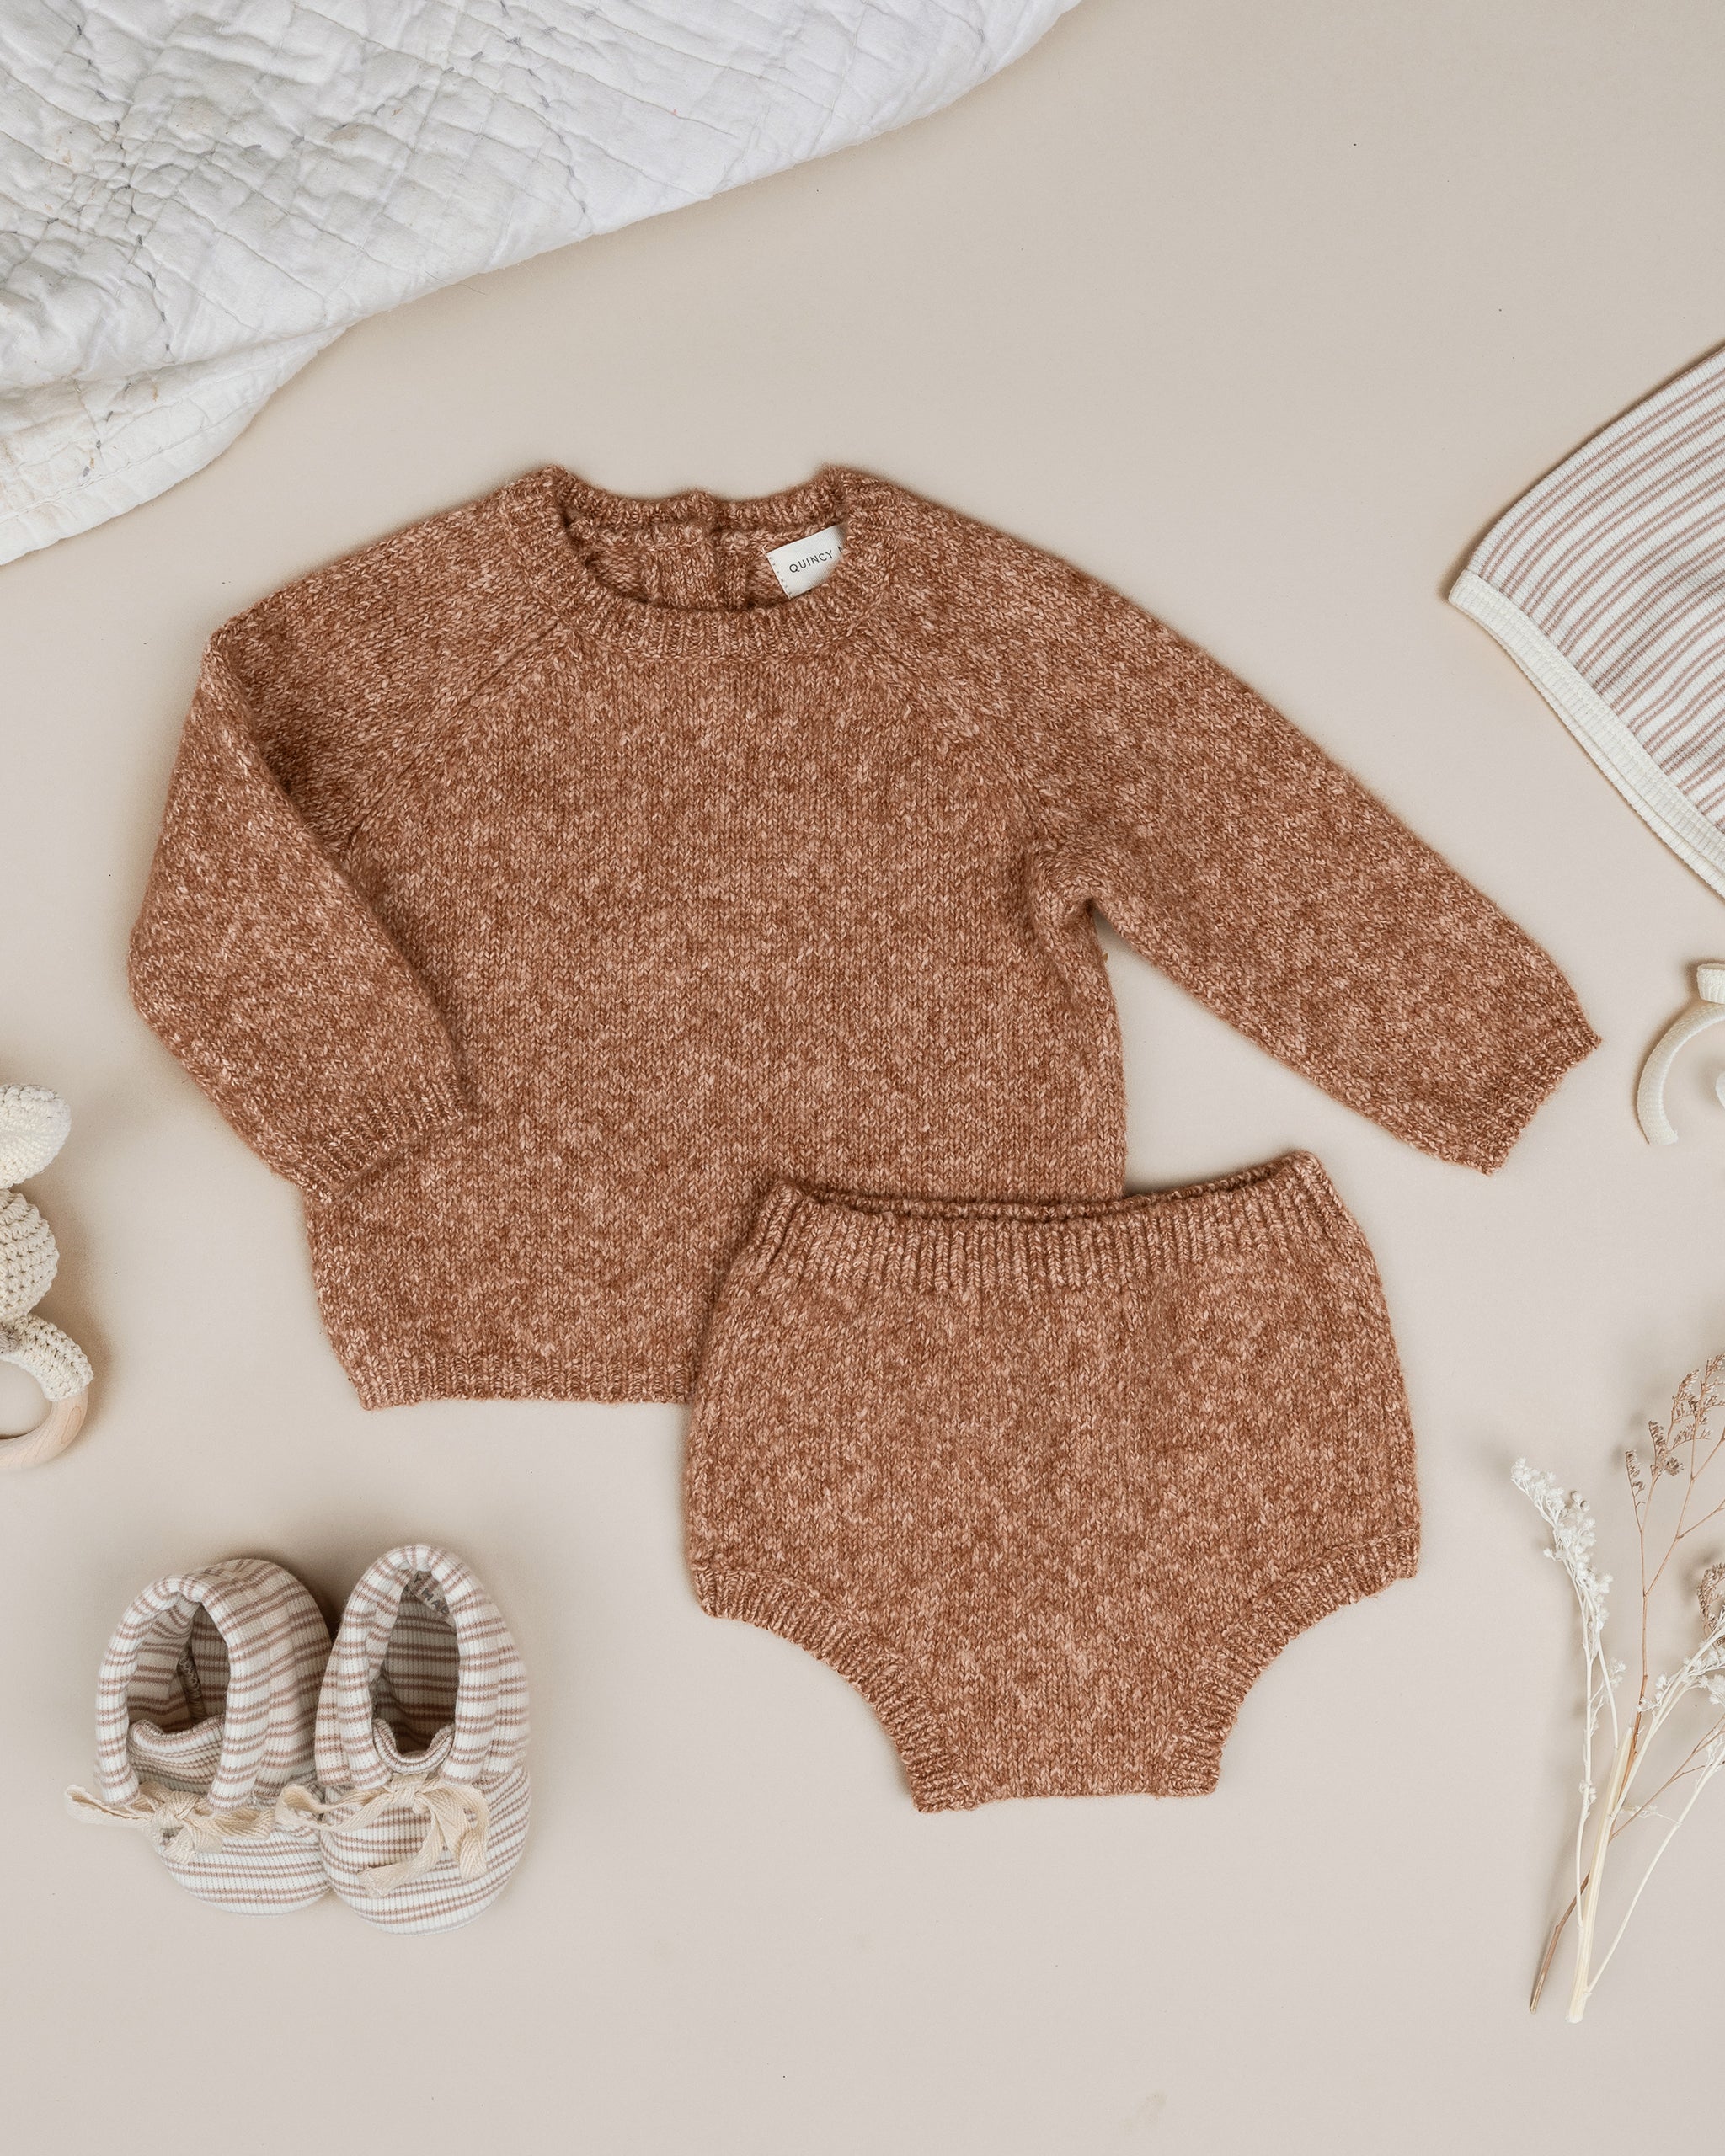 Bailey Knit Set || Heathered Clay - Rylee + Cru | Kids Clothes | Trendy Baby Clothes | Modern Infant Outfits |